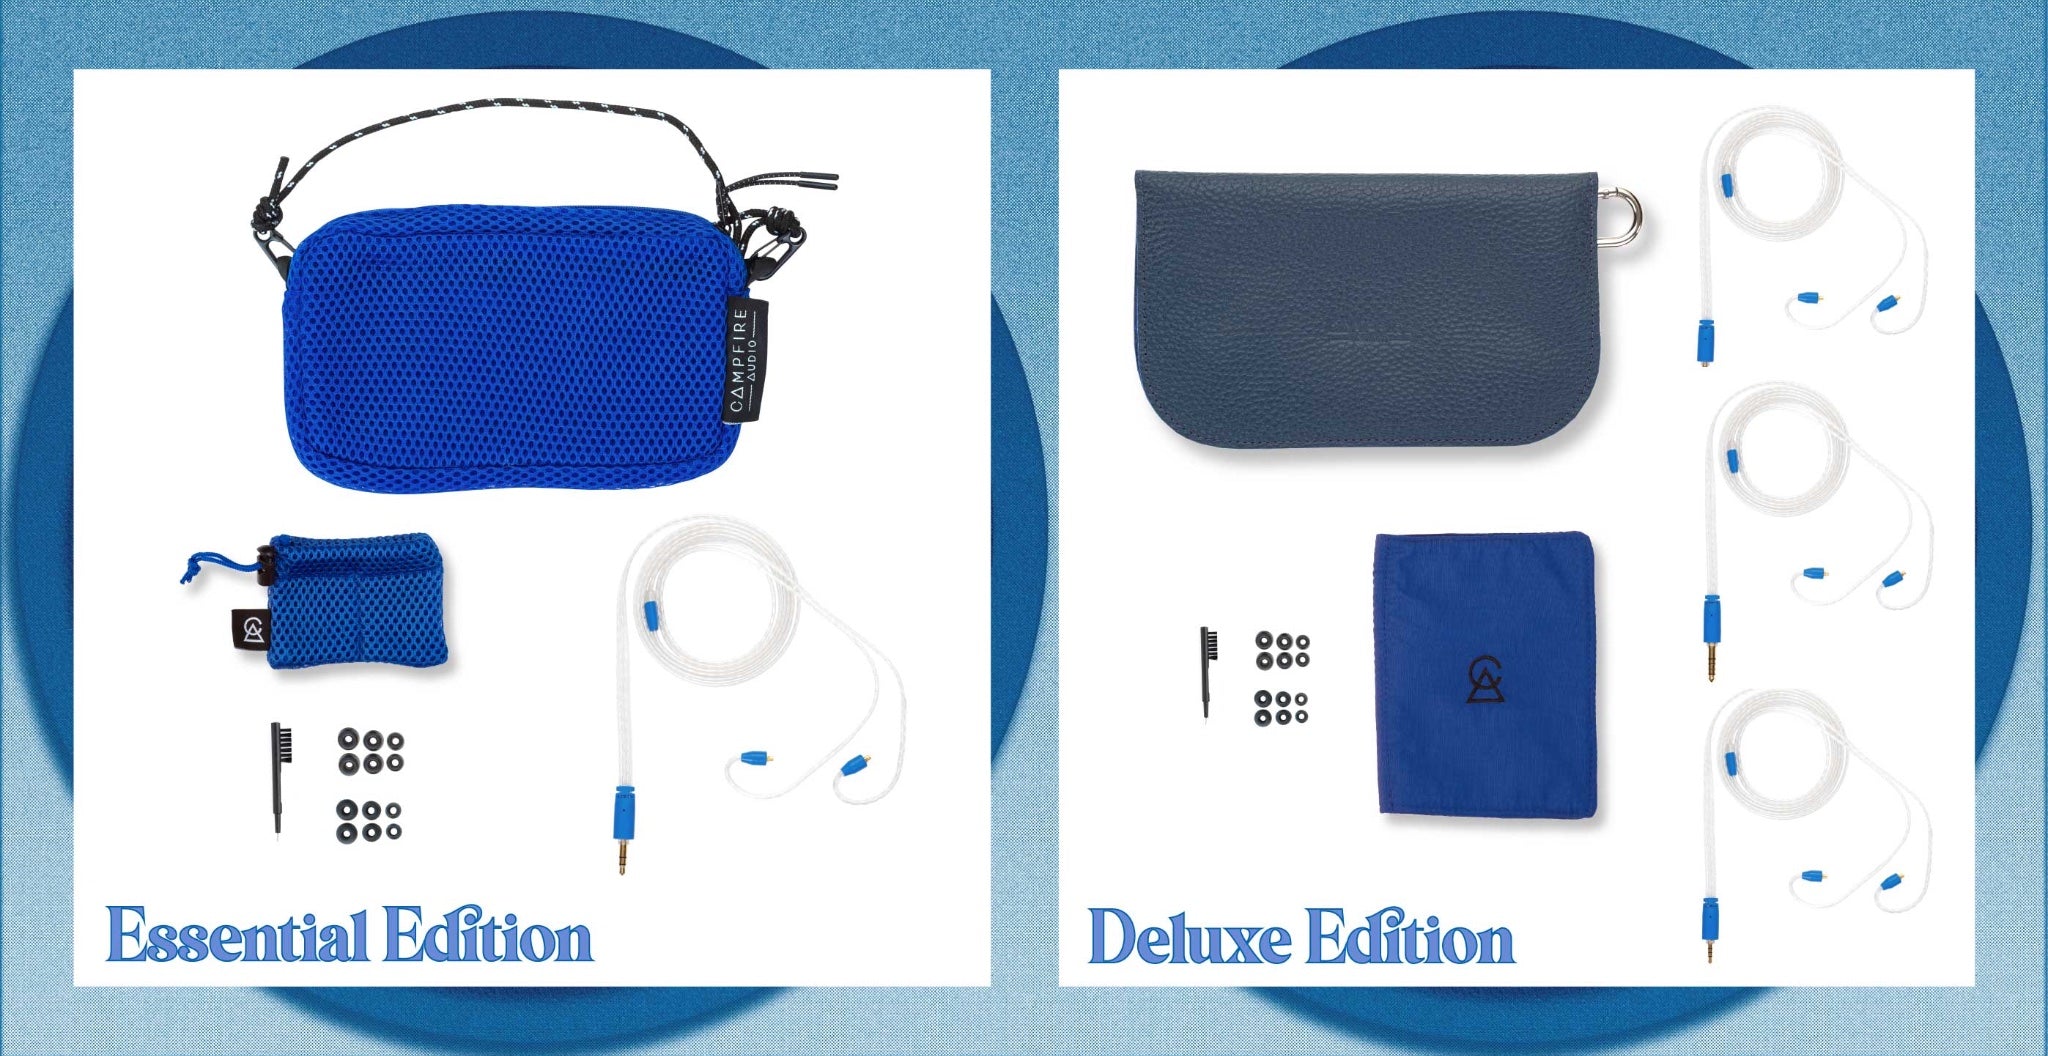 Campfire Audio Cascara blue essential and deluxe accessory package options with blue frame